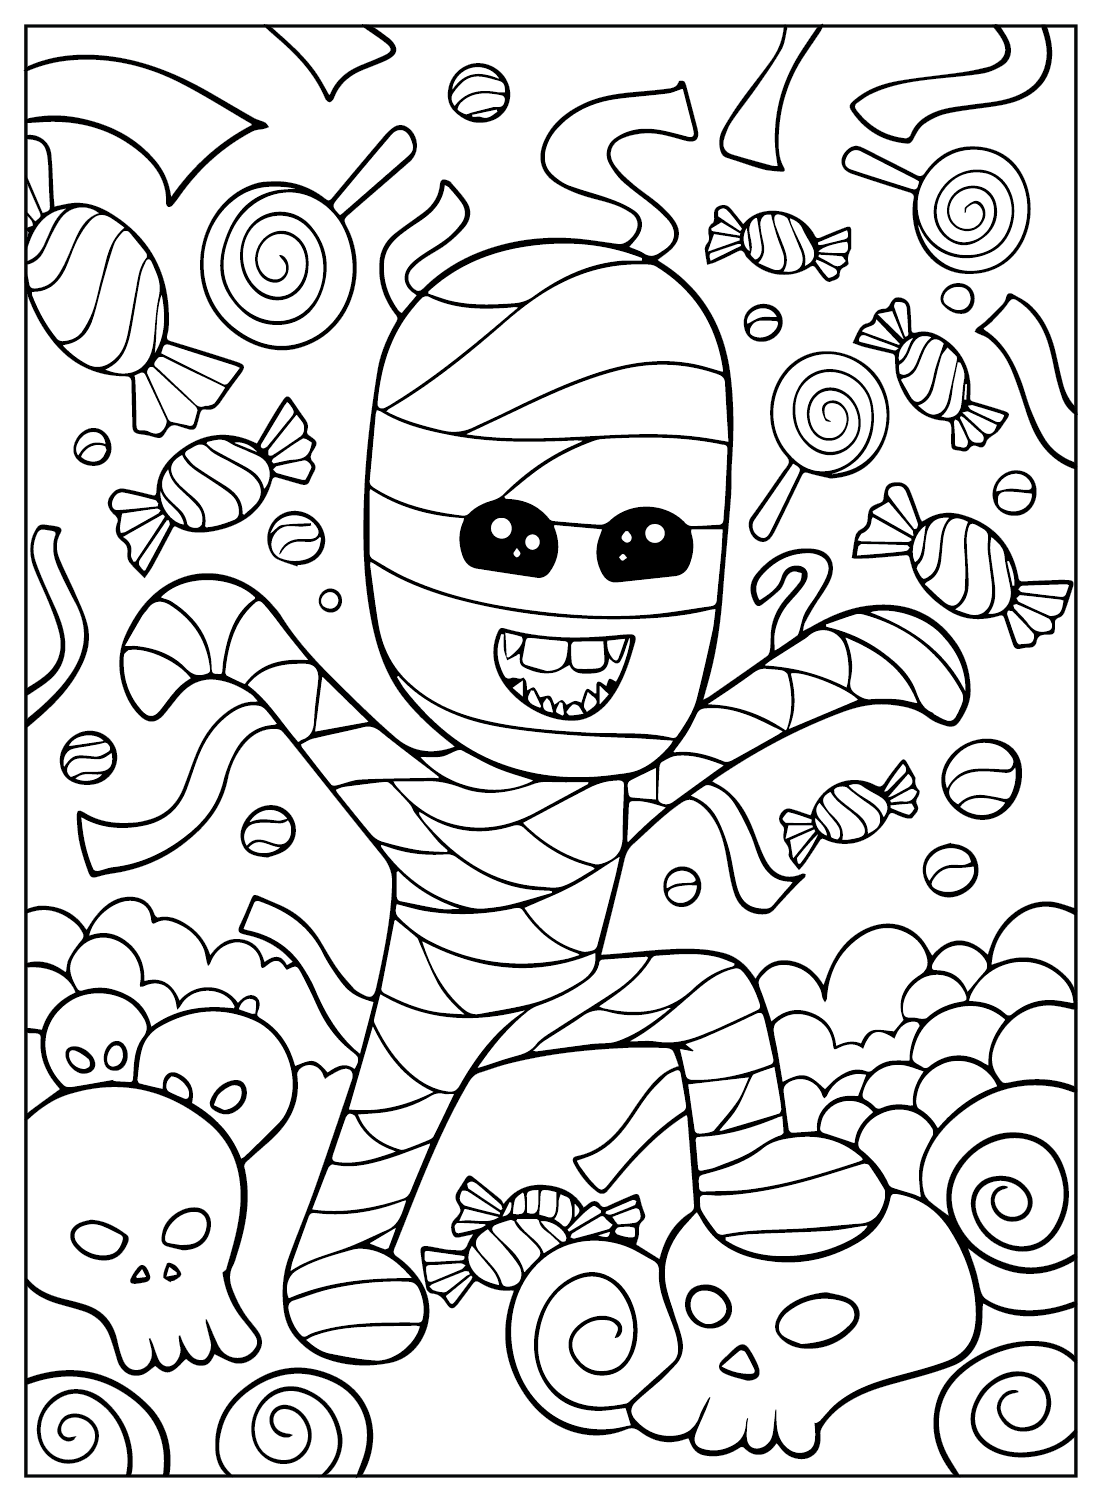 The Mummy Coloring Page